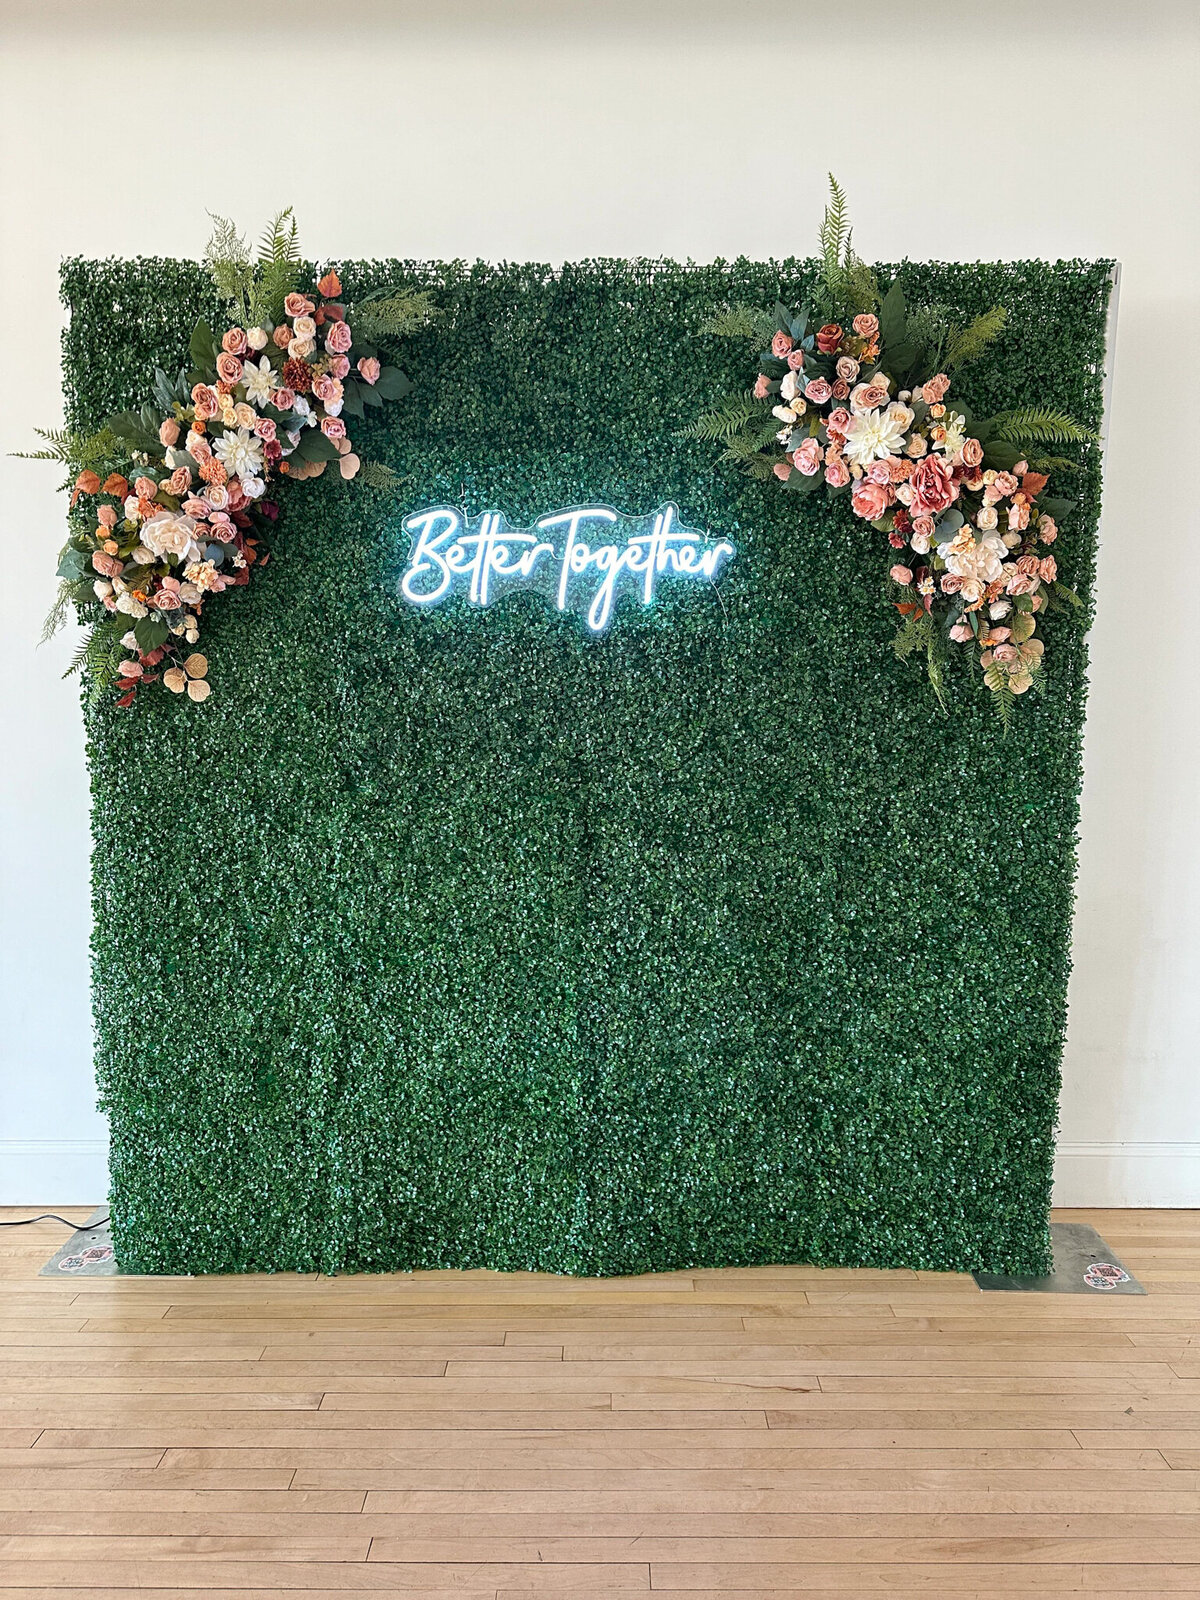 Better together sign from Love In Bloom, neon sign decor rentals based in Lethbridge, AB. Featured on the Brontë Bride Vendor Guide.